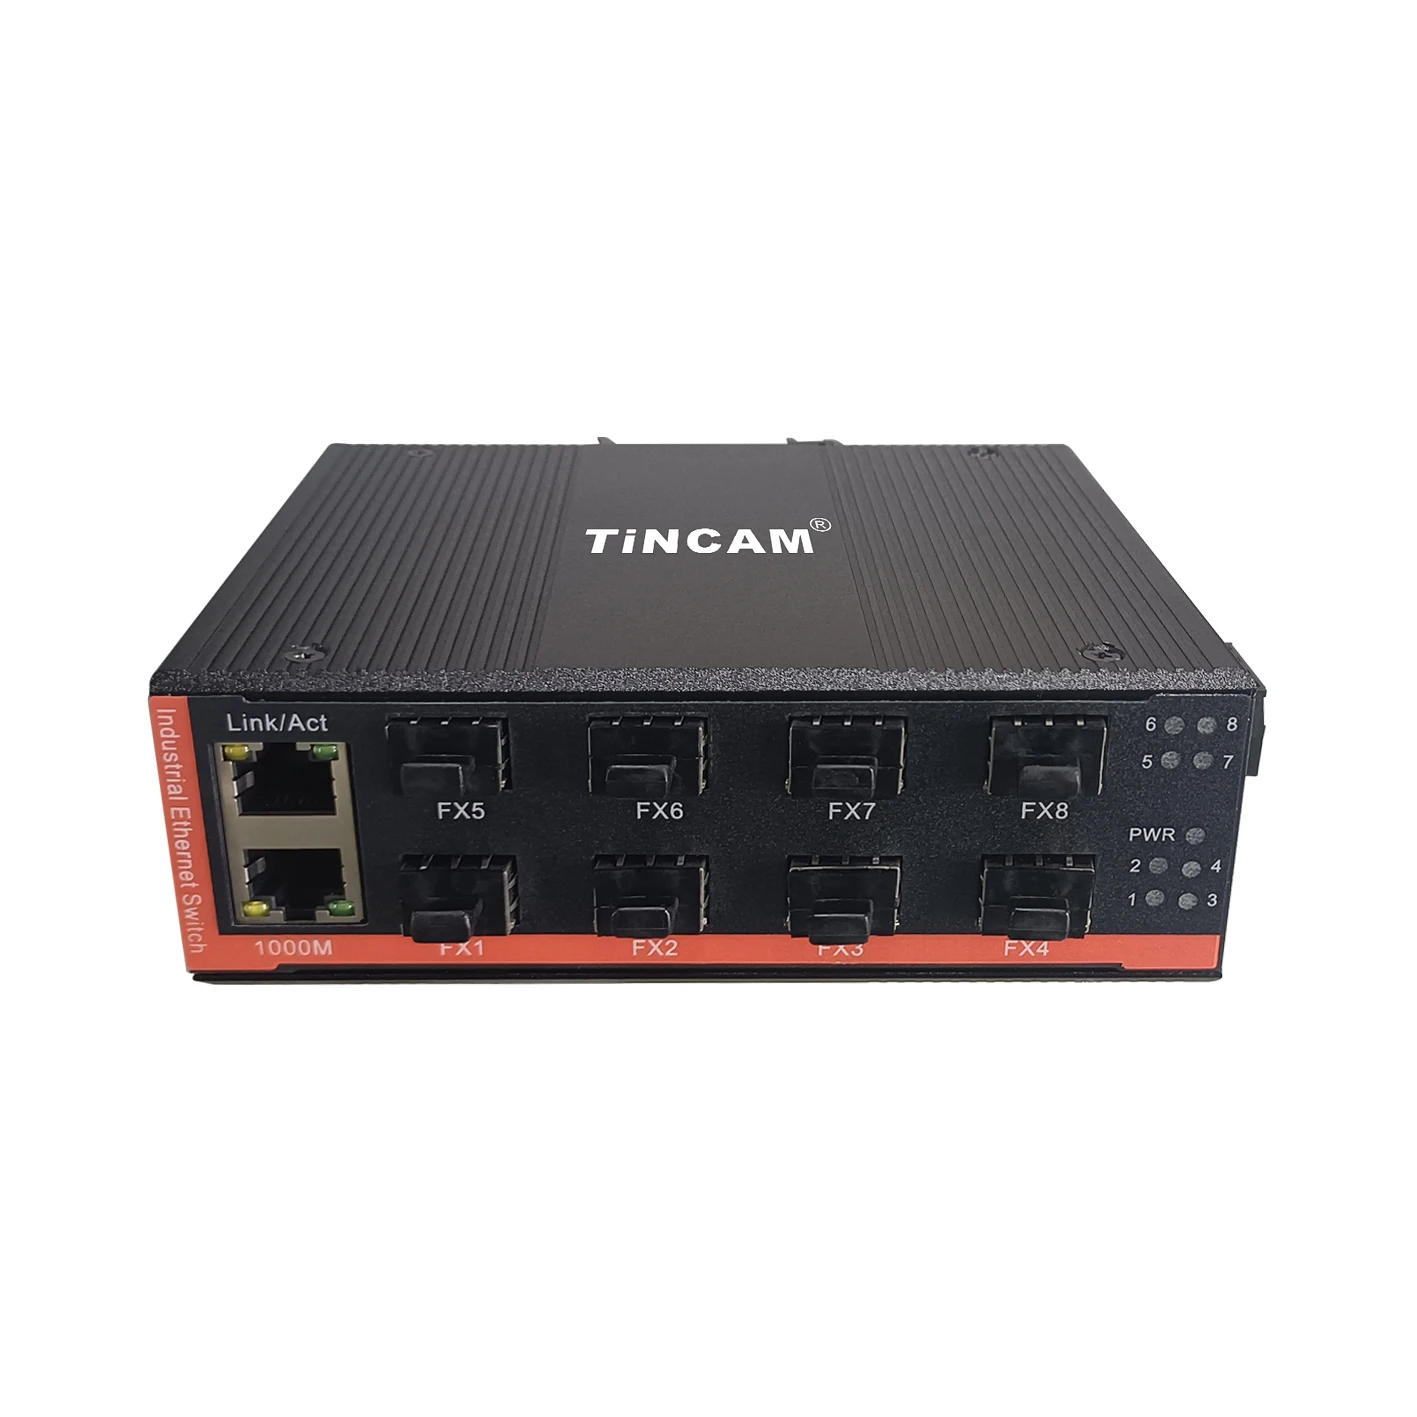 TiNCAM Gigabit 10Port Access 8*SFP+2*RJ45 Industrial Network Switch Aggregation Industrial Media Converter allied telesis taa 10 100 1000t to 100x 1000x sfp industrial temp gigabit media converter